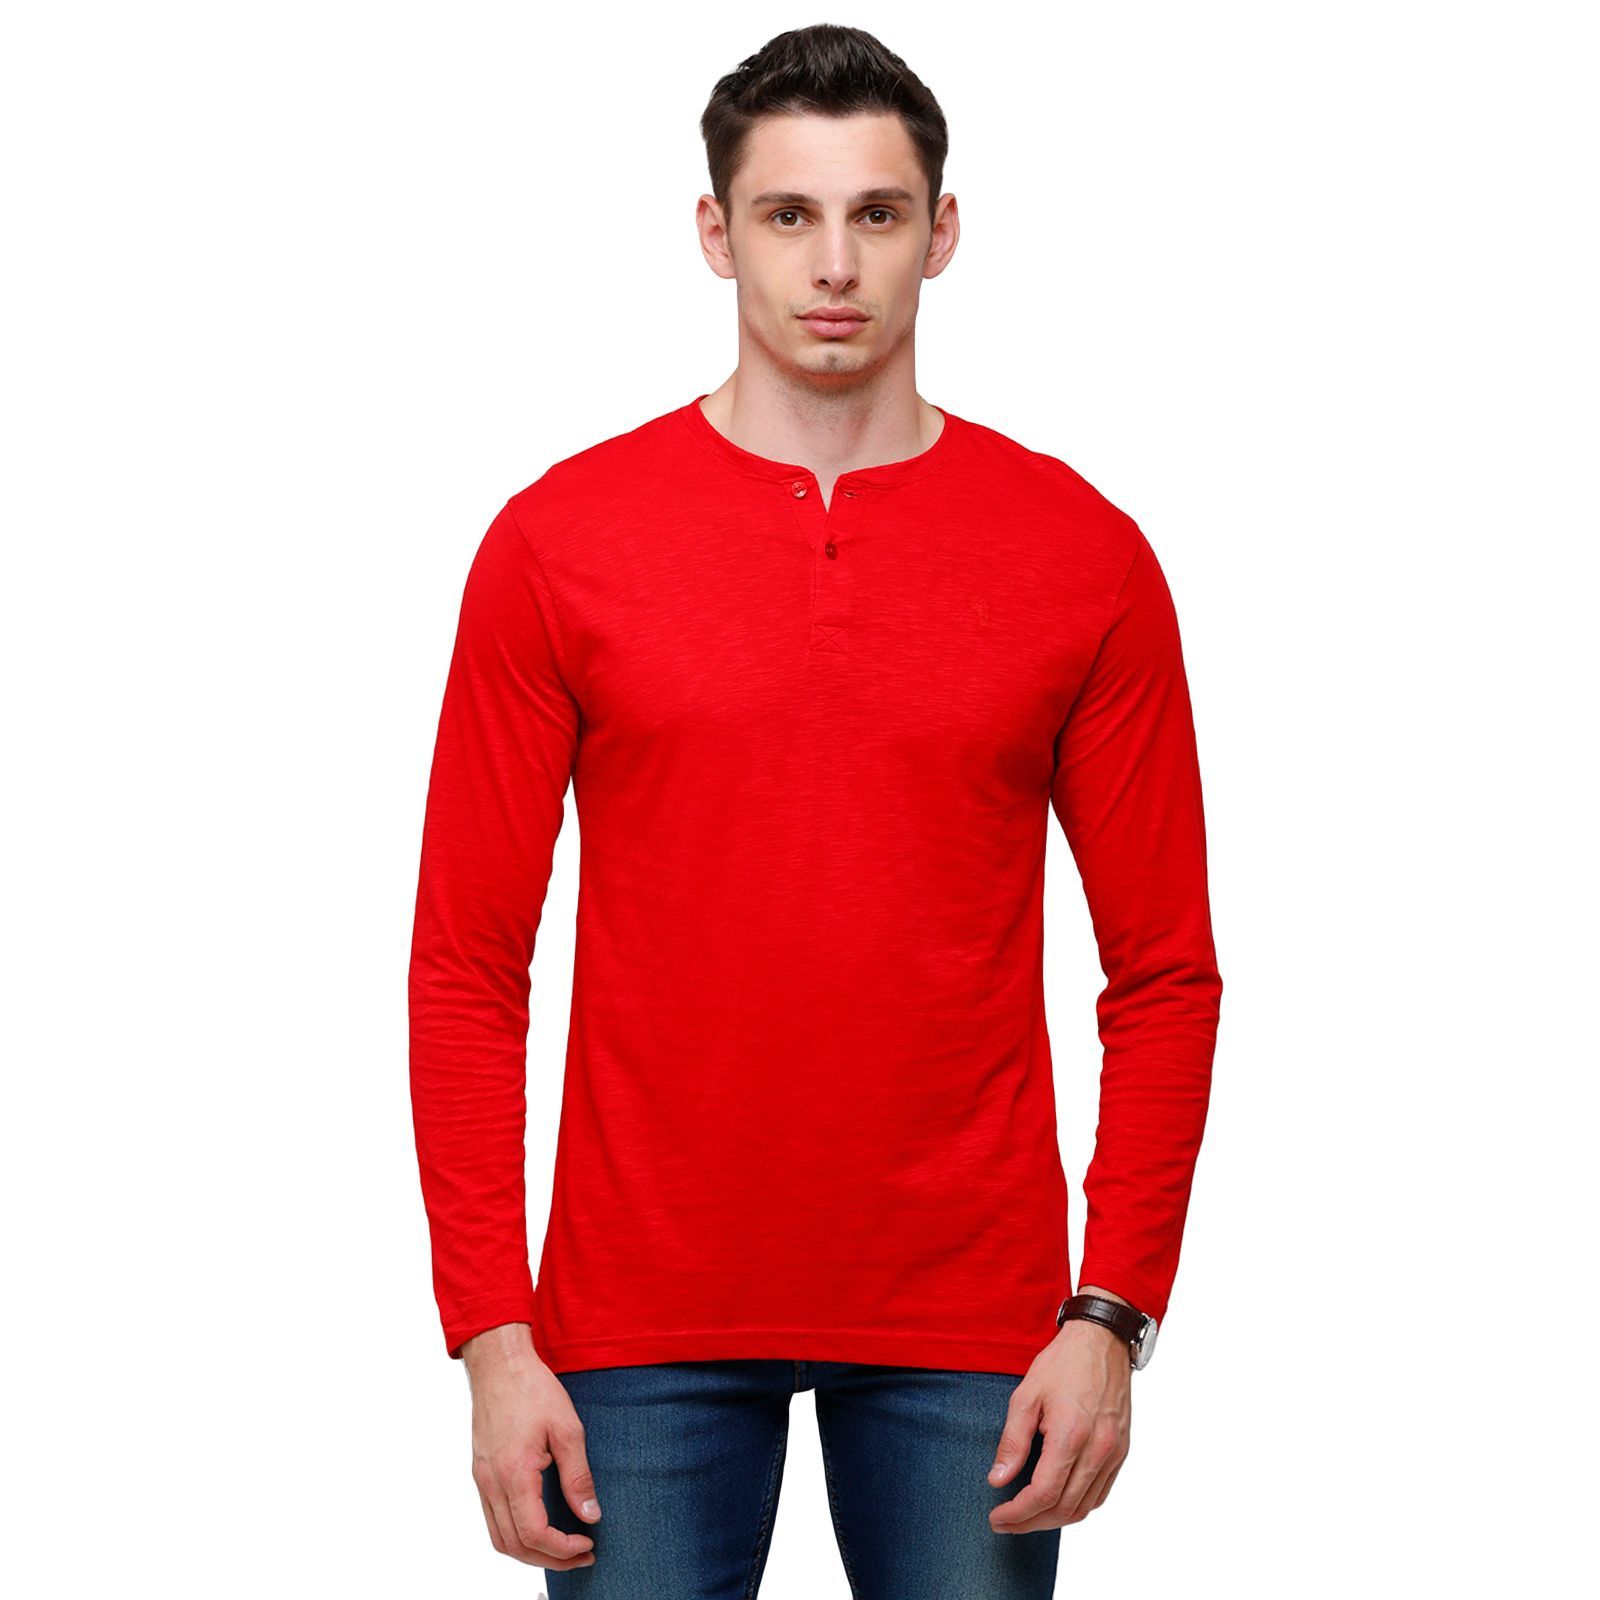 Classic polo Men's Red Full Sleeve Slim Fit Henley Crew T-Shirt - Ozel-True Red T-Shirt Classic Polo 